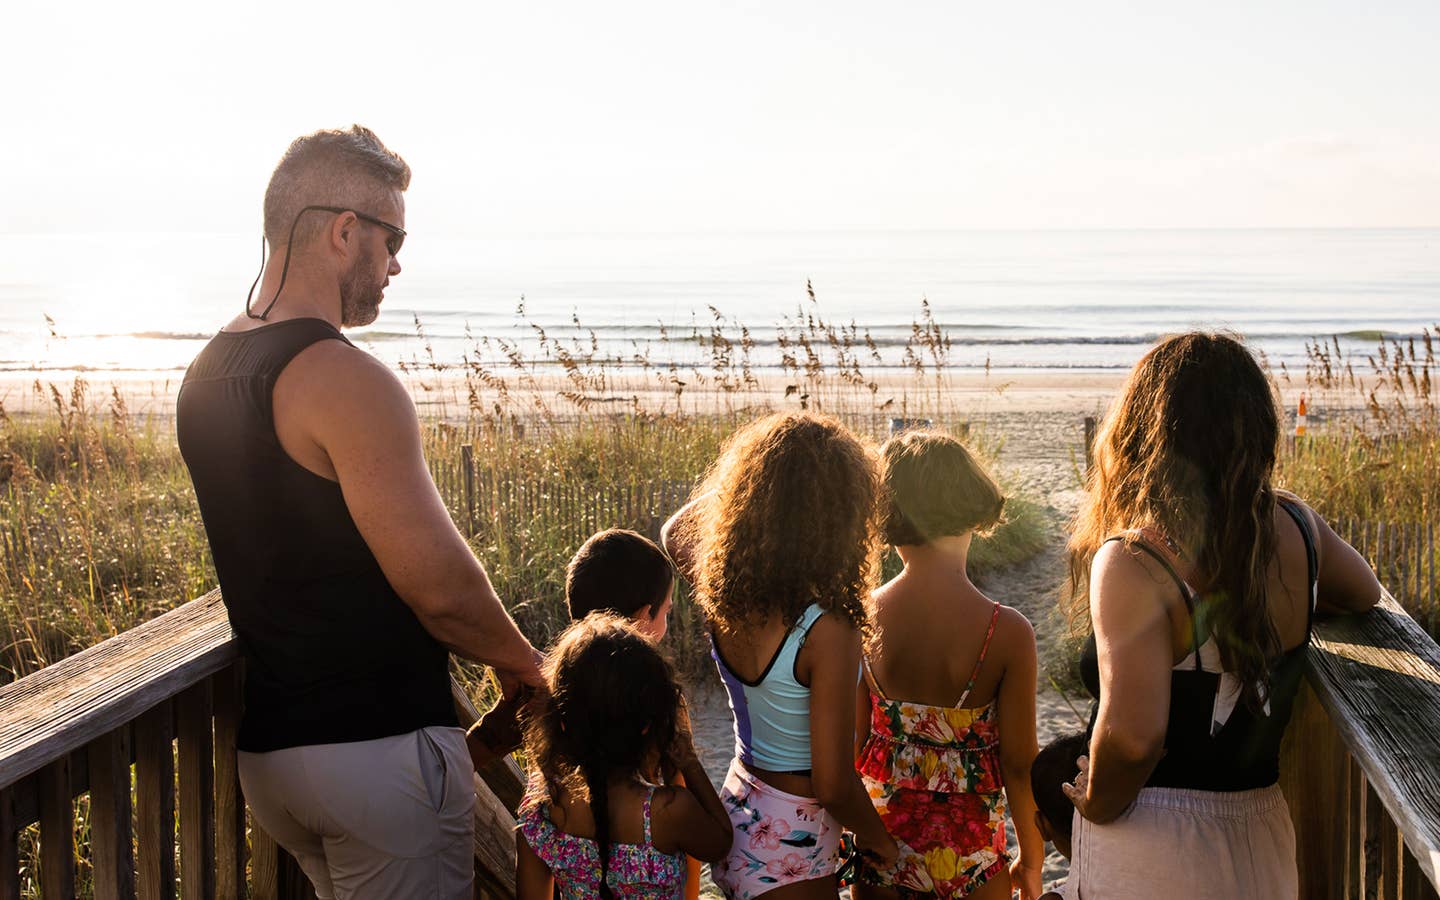 Author, Brenda Rivera Sterns' family stands facing the sunrise along the beach near our South Beach Resort in Myrtle Beach, South Carolina.